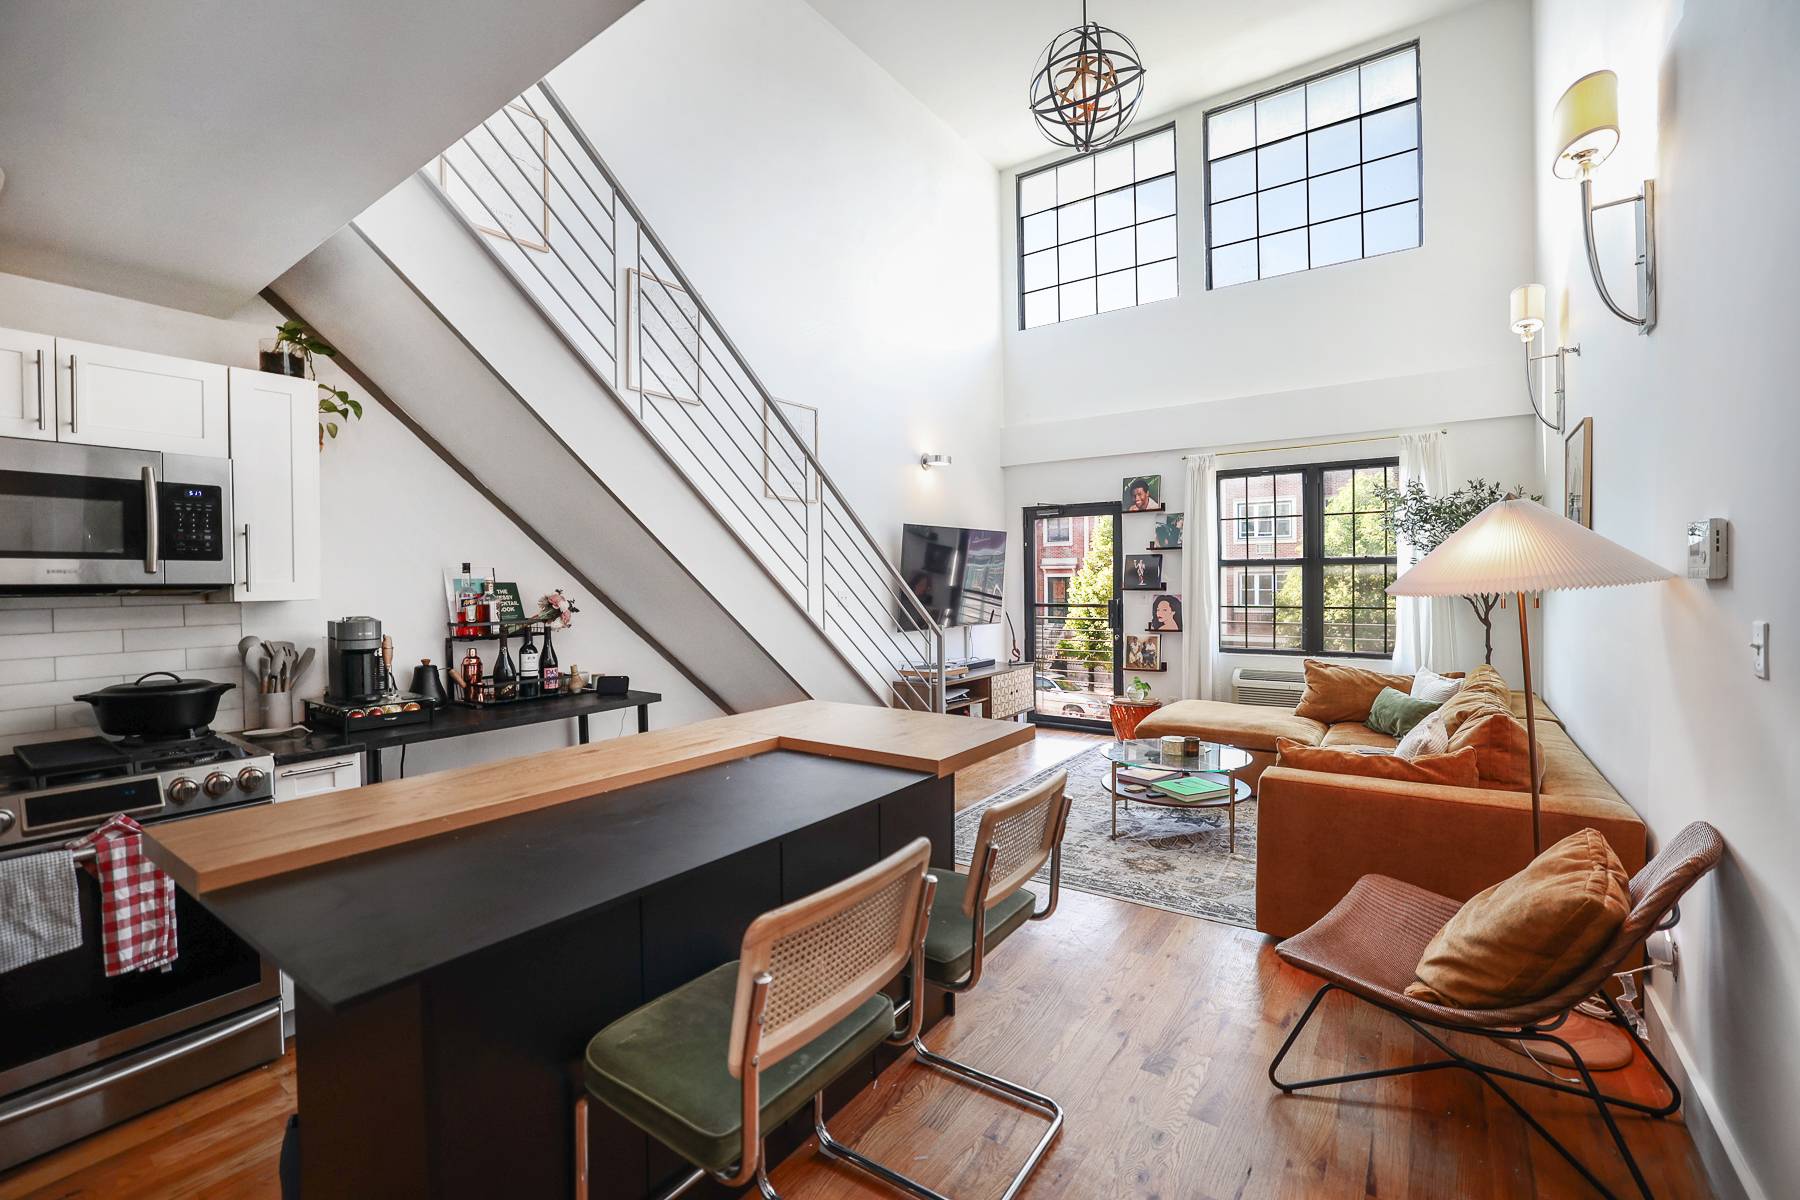 Welcome to this luxurious 2 bedroom 2 bathroom loft duplex in the heart of Bedstuy.